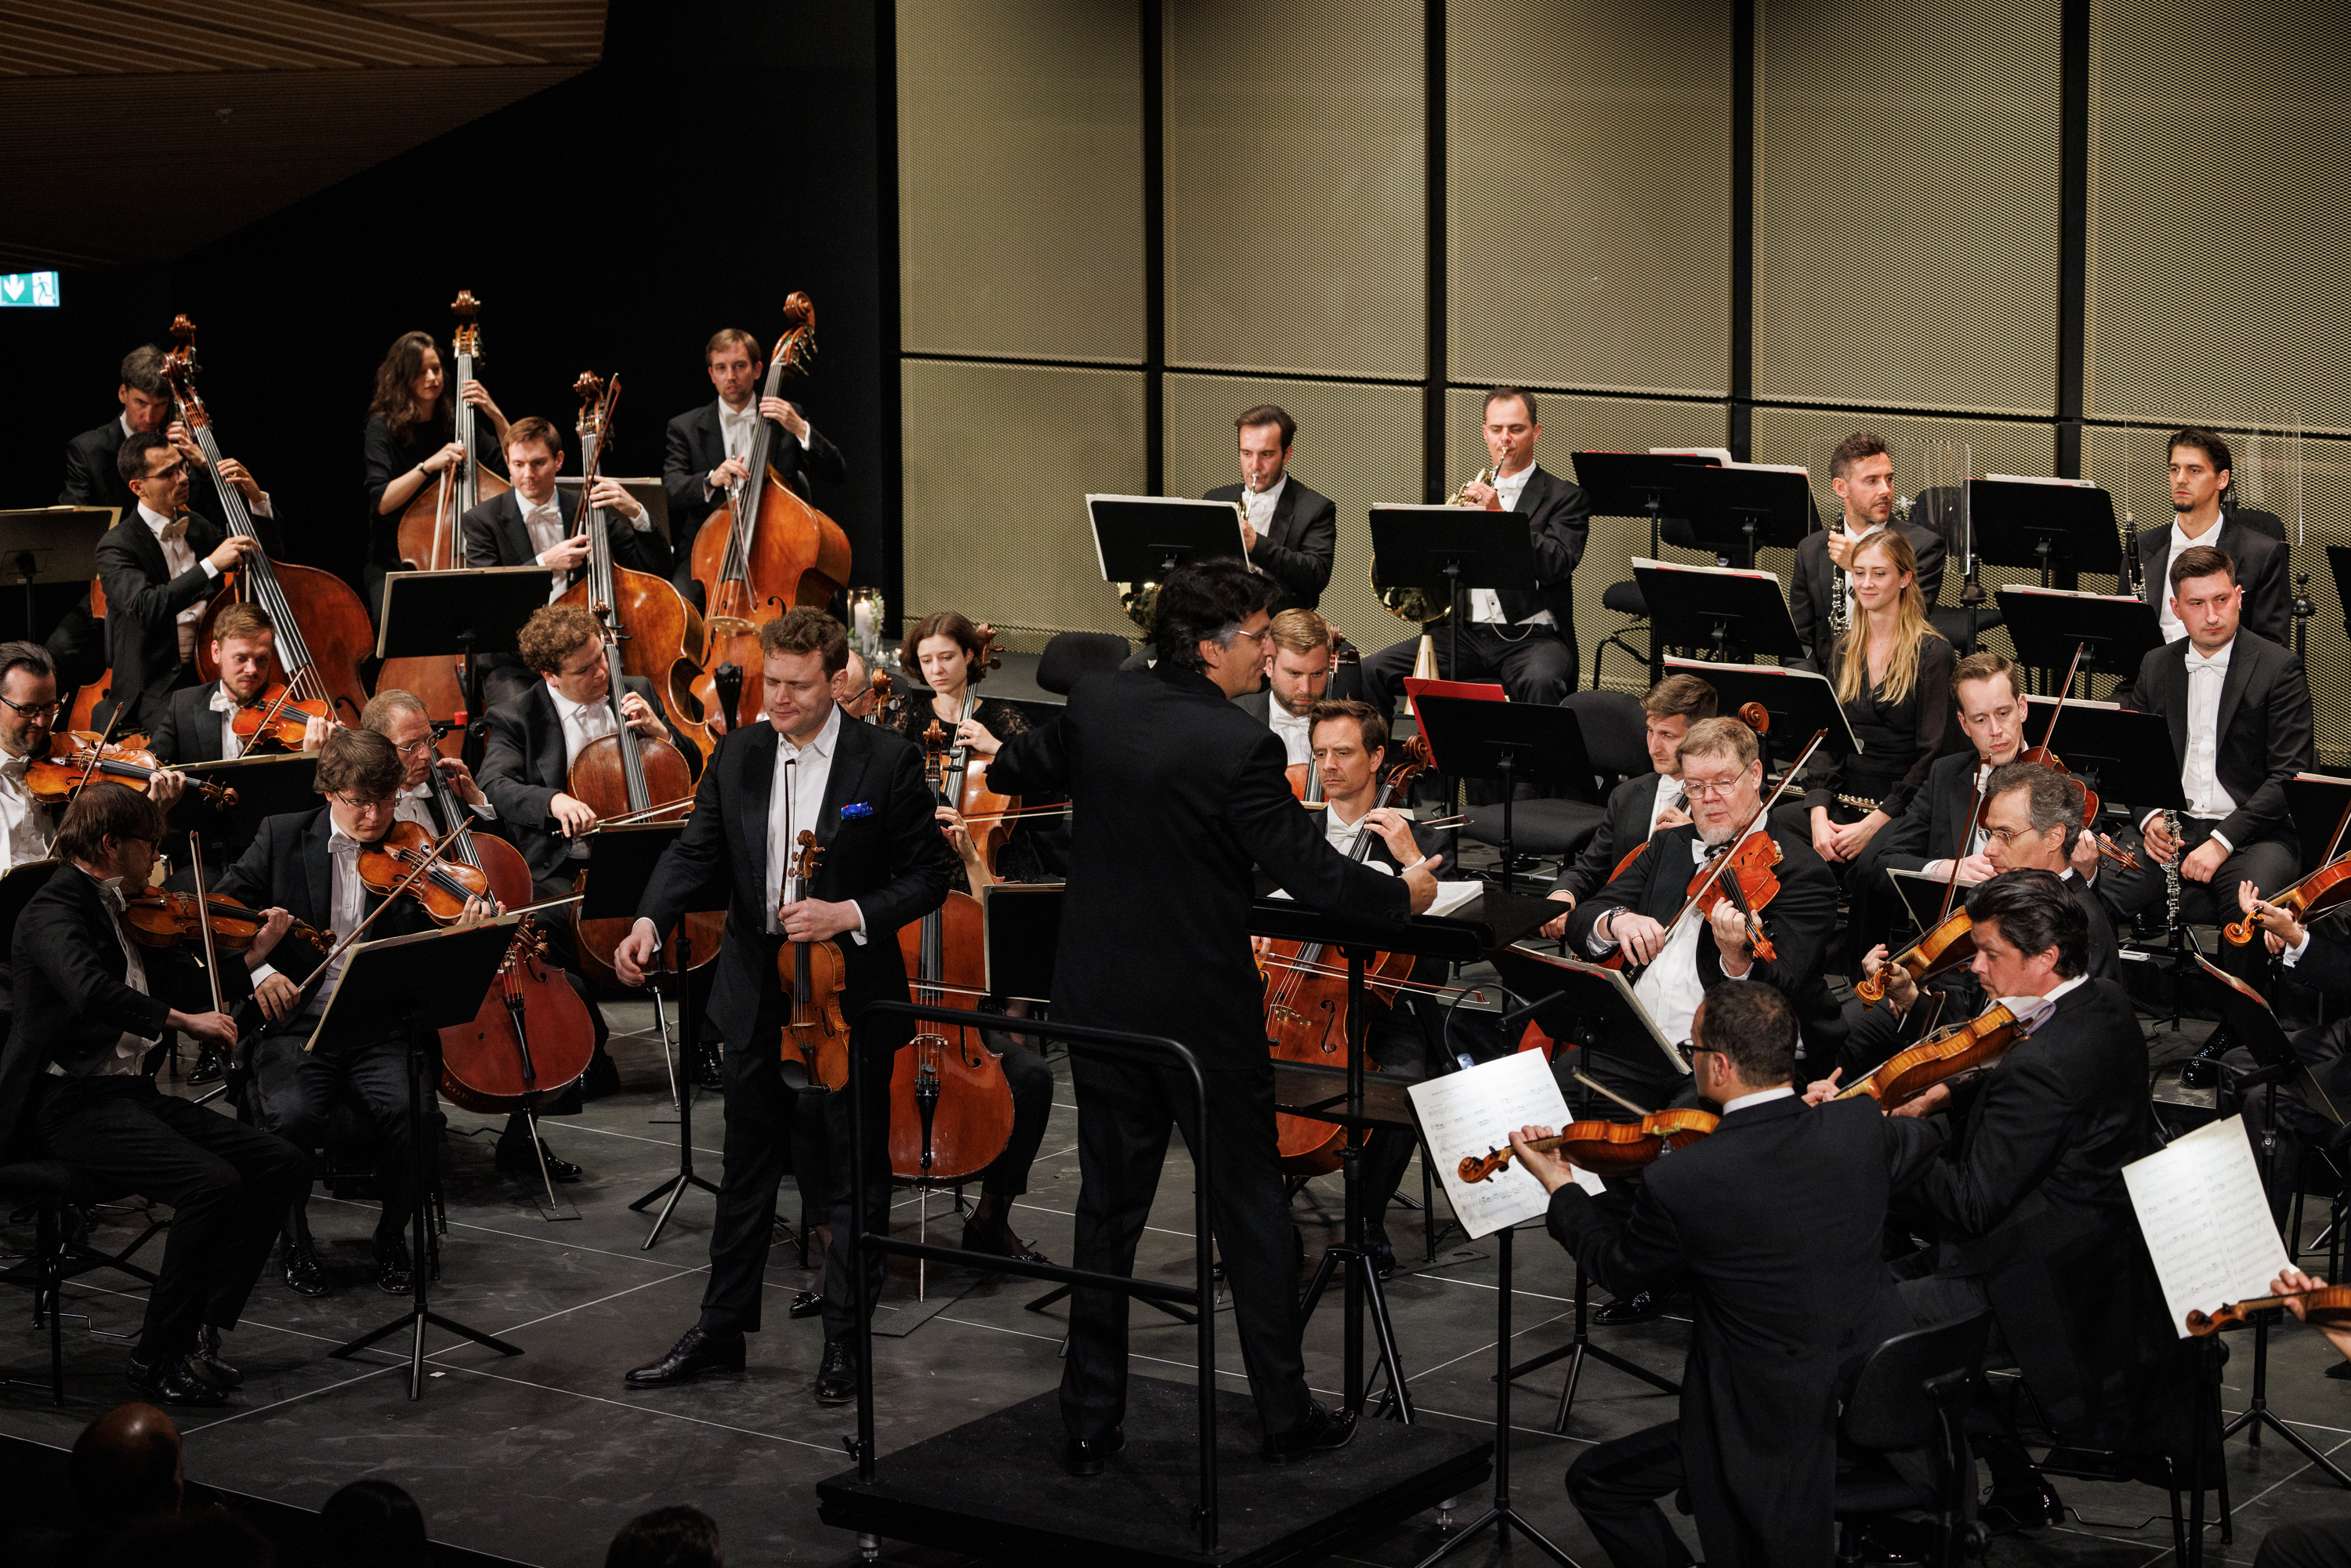 7th festival edition was "a great success" - further cooperation with LSO planned